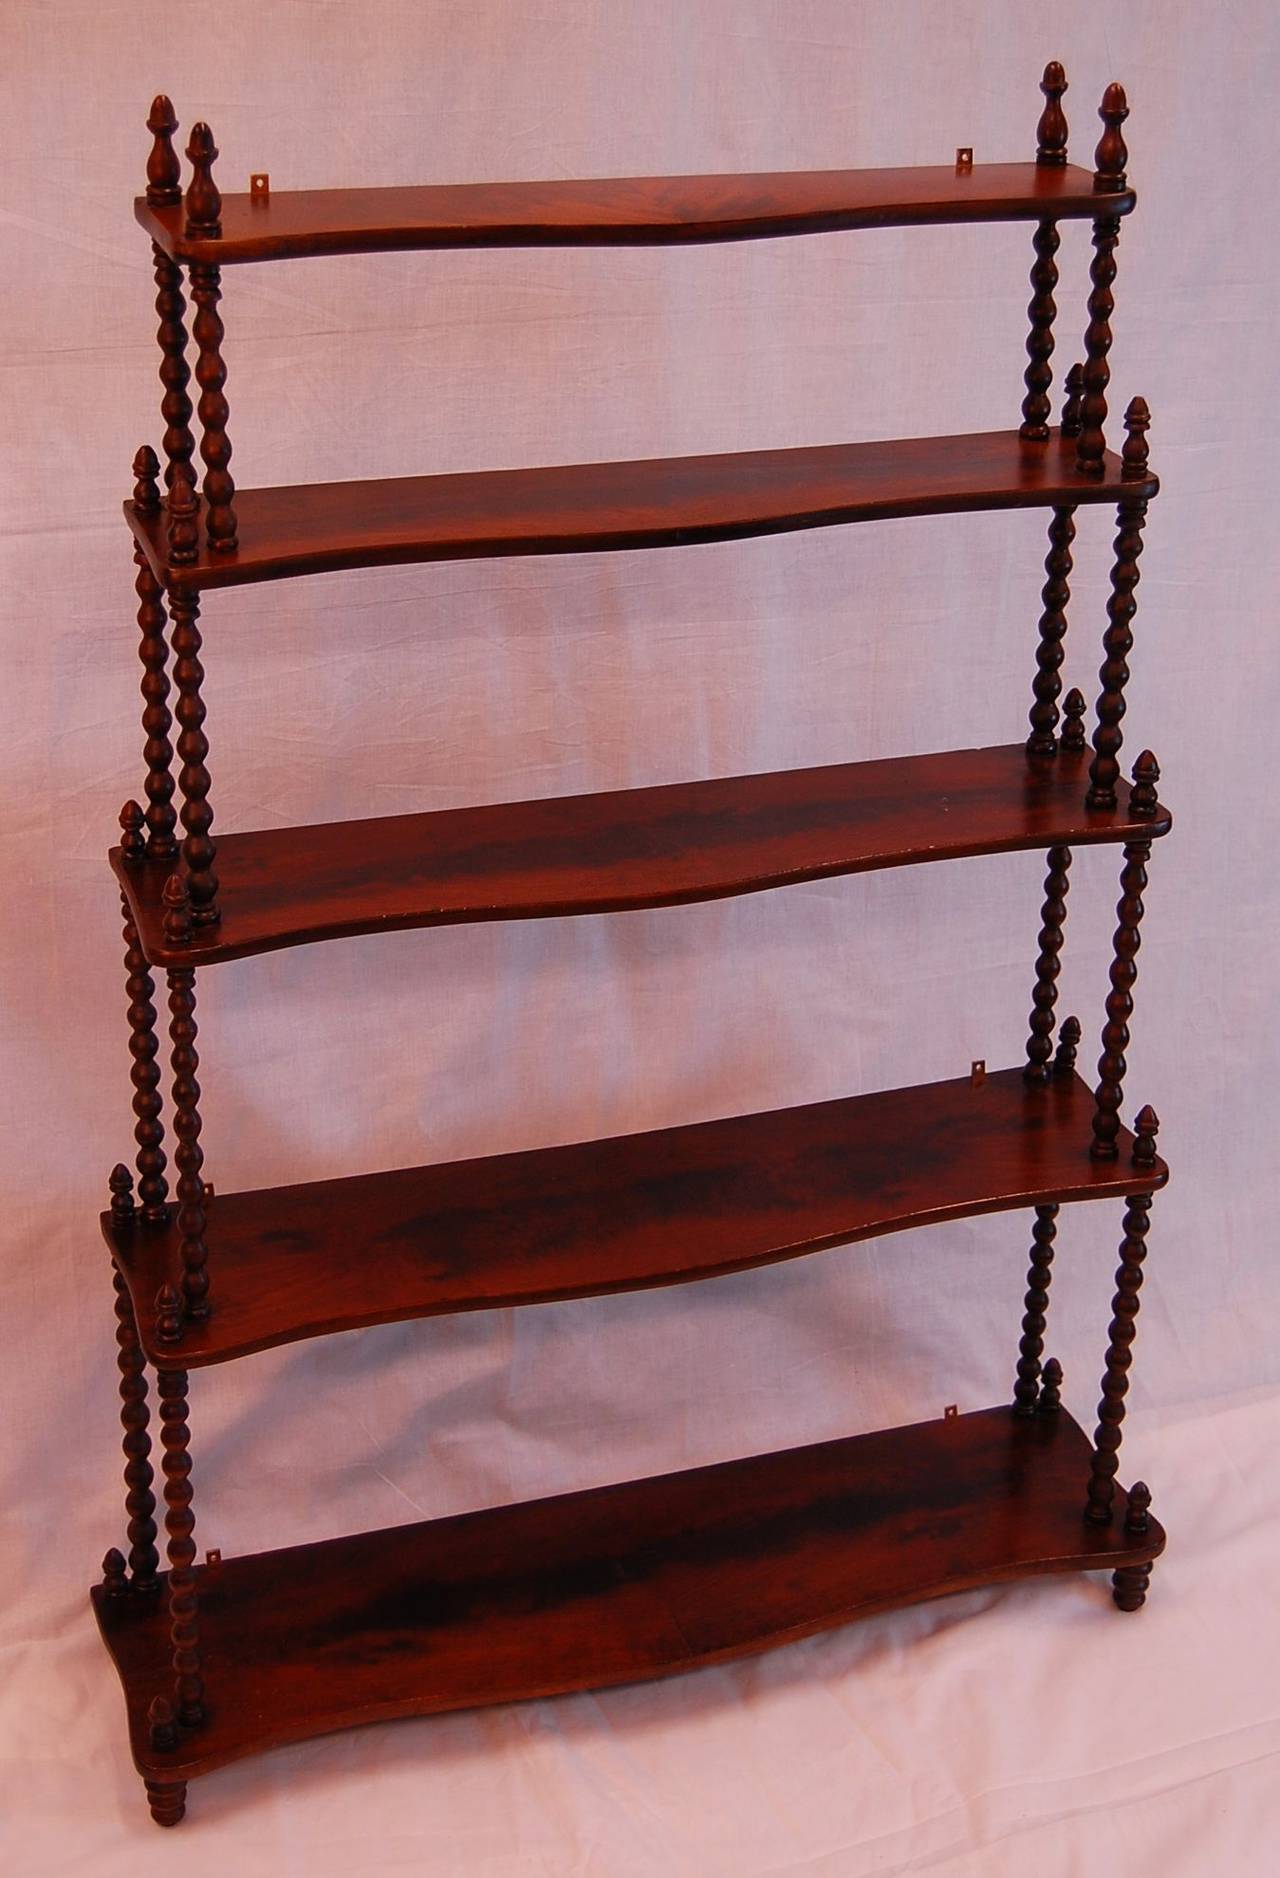 Mahogany 5 tier wall mounted shelf in excellent condition. The depth of each shelf at center is: 5.5"; 6.25; 7.25; 8.25; 9.25. Excellent condition with mounting brackets attached.